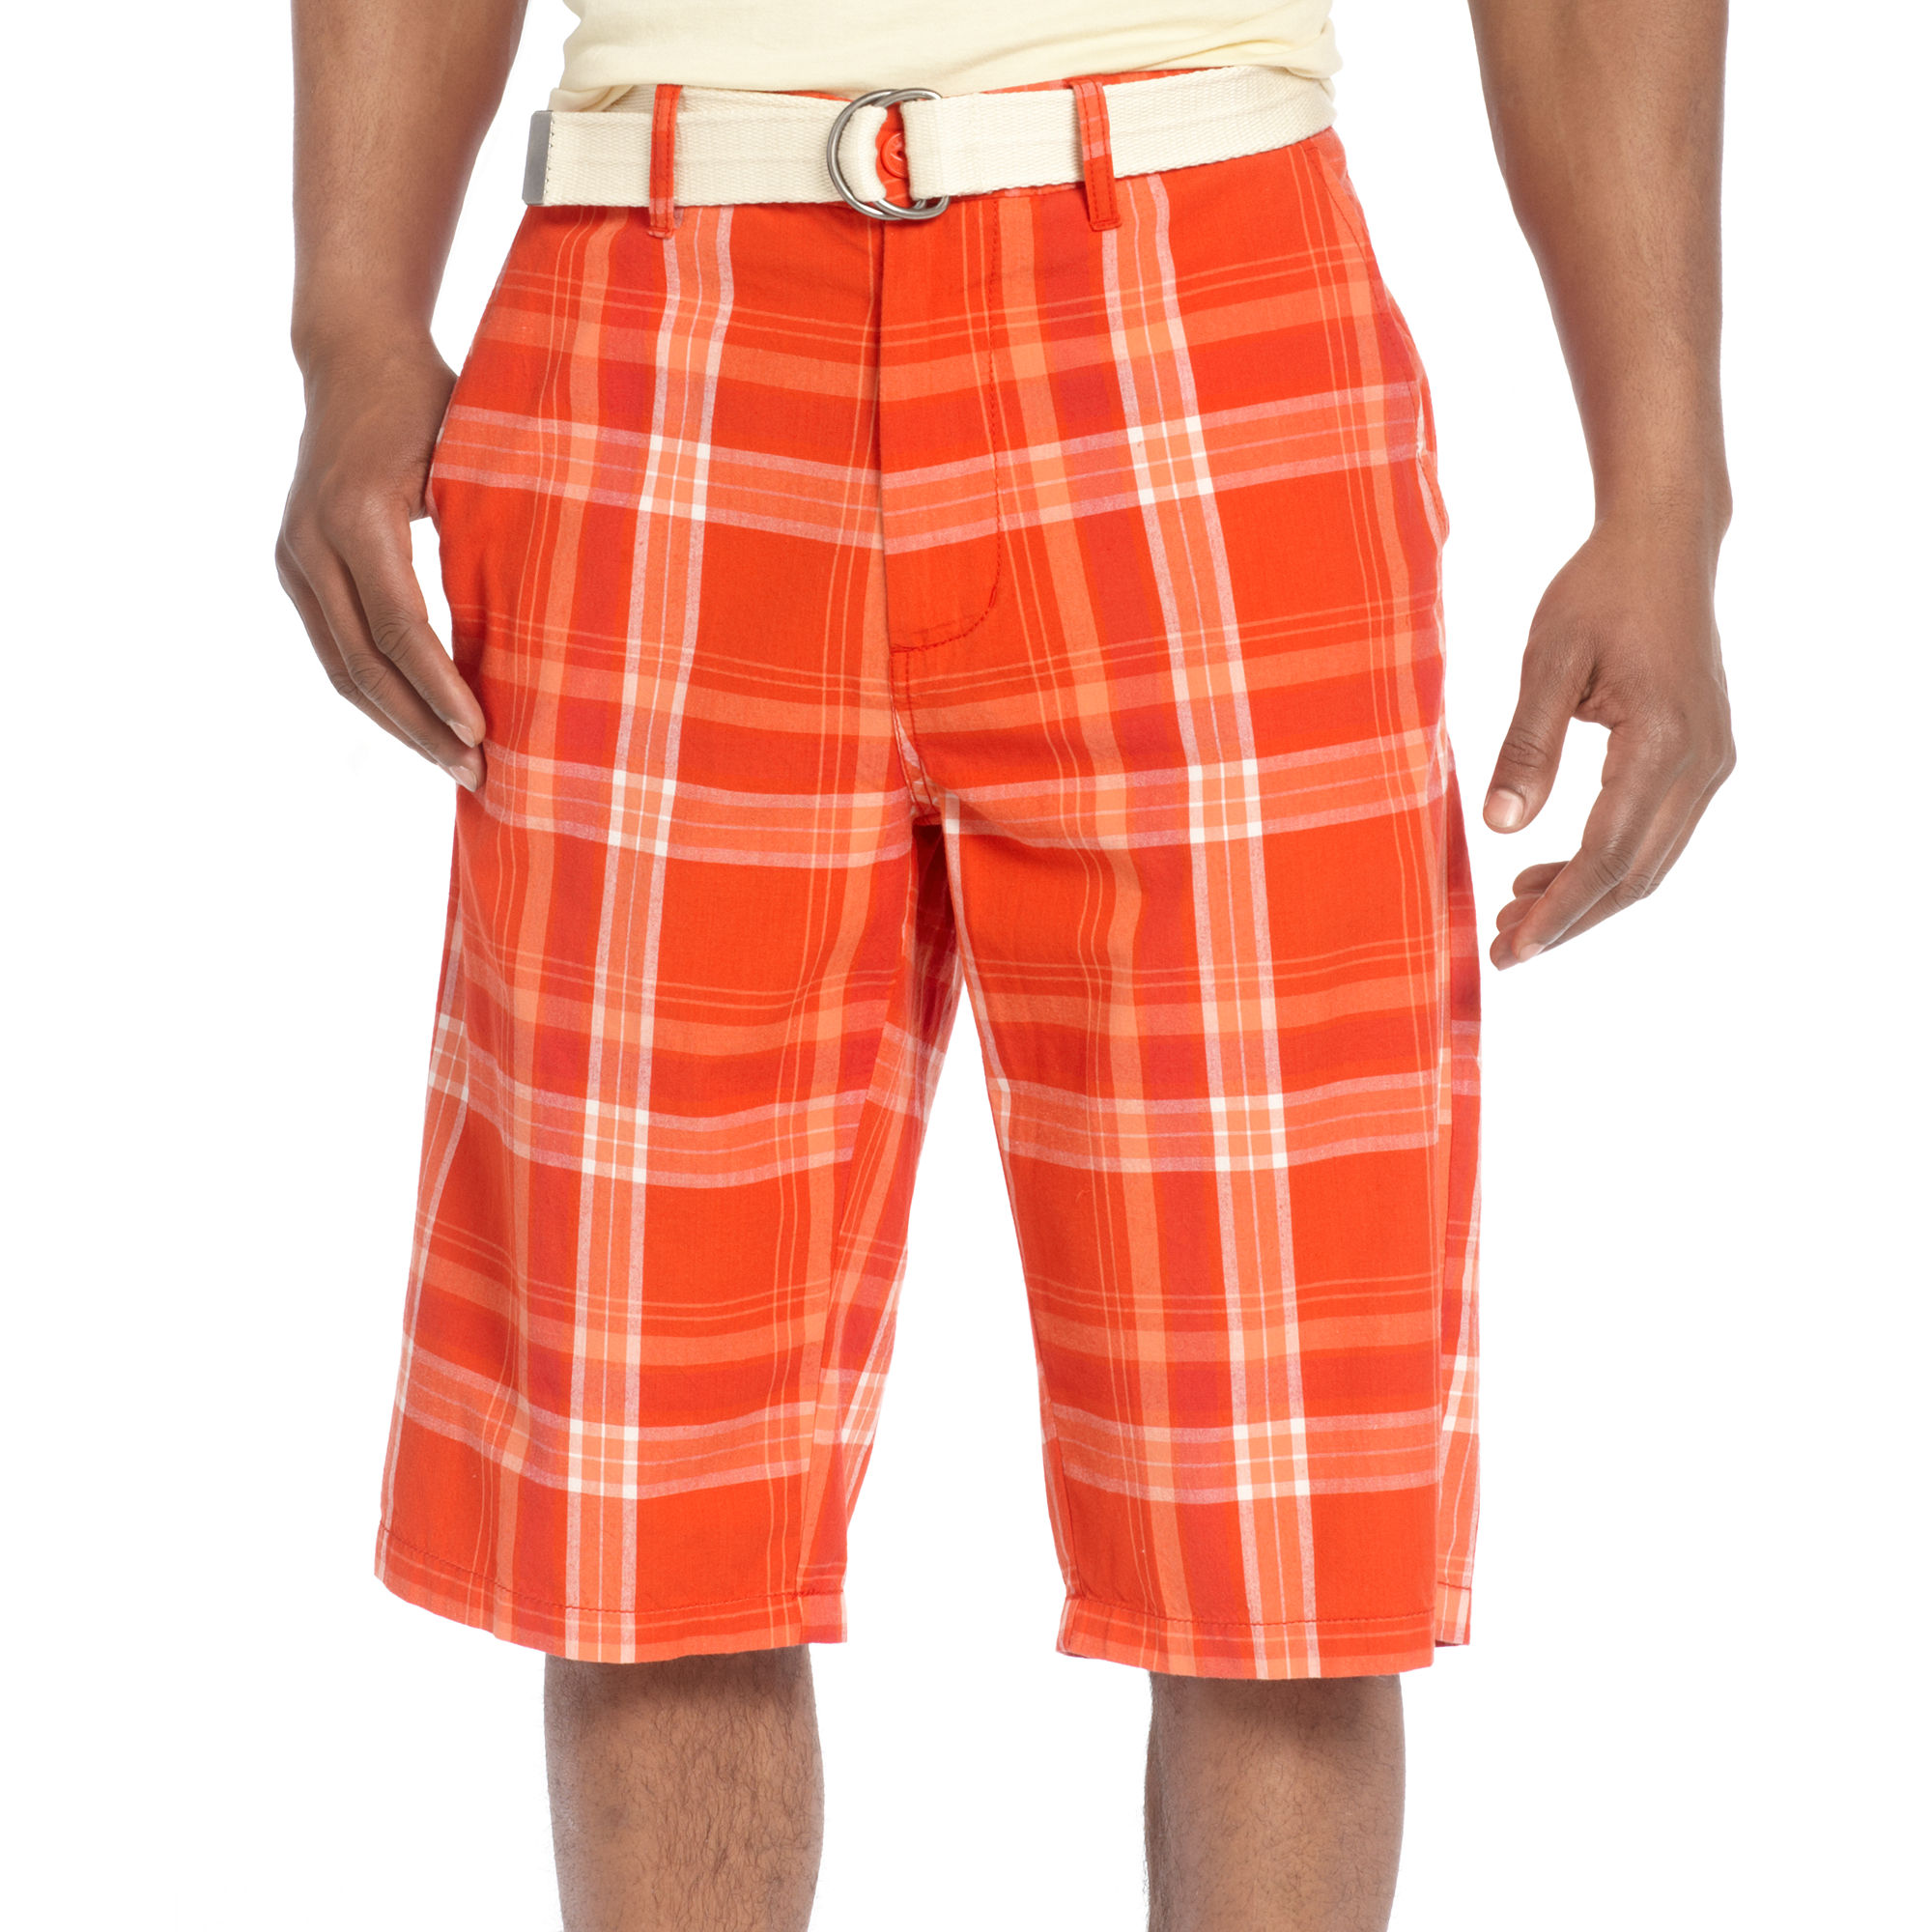 Lyst - Sean john Plaid Shorts in Red for Men